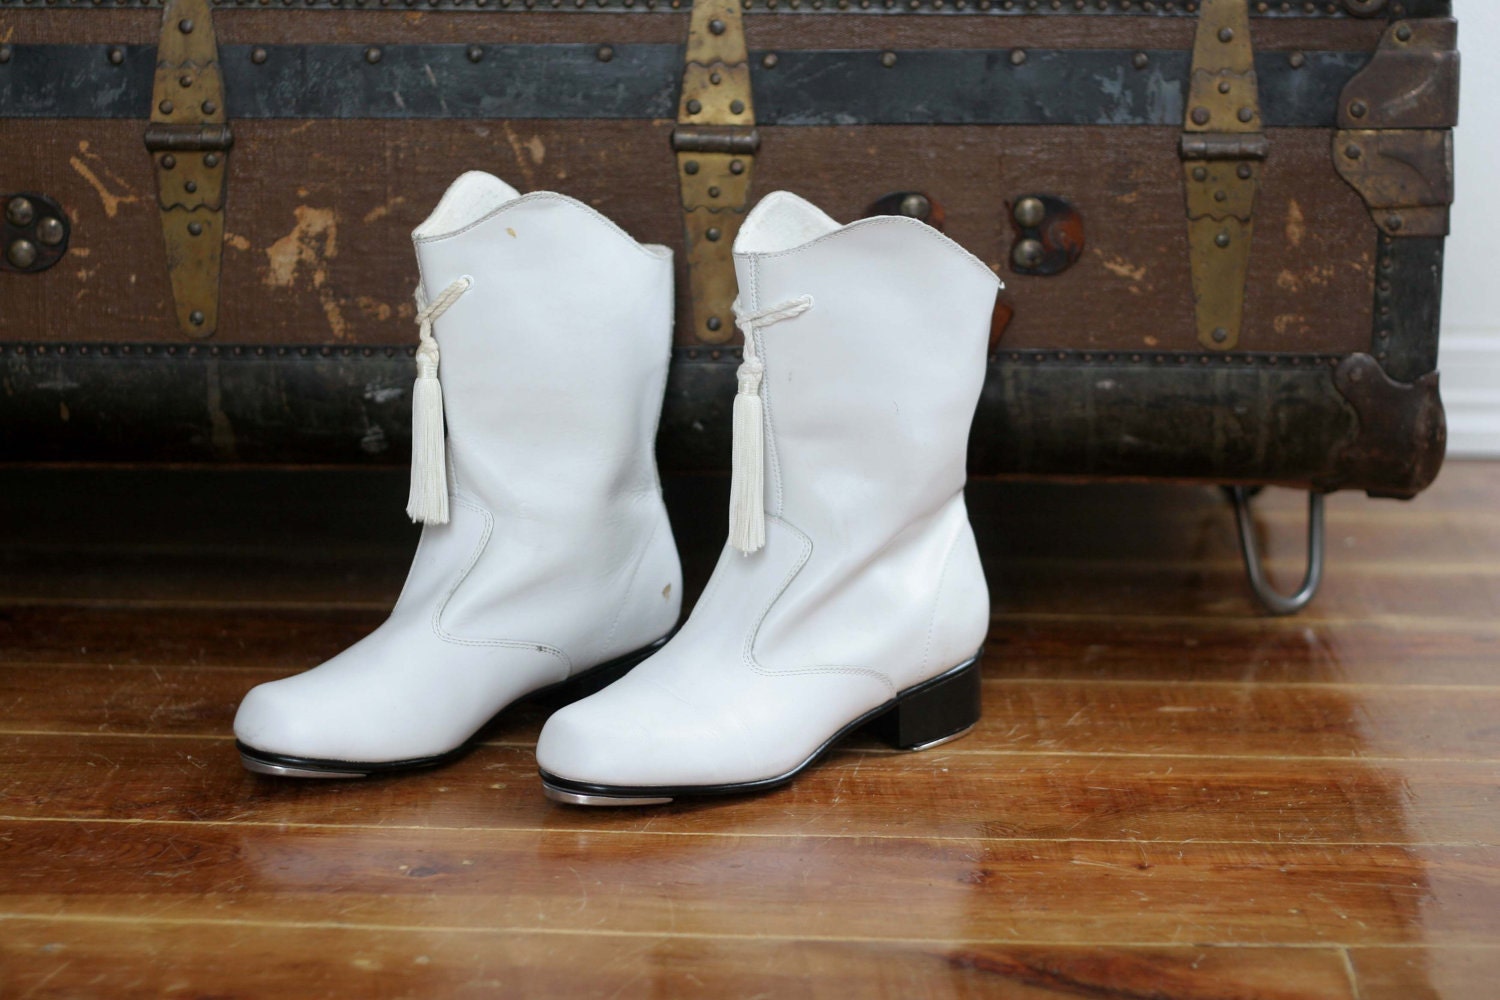 Tone Master Majorette Boots Marching Band Boots White